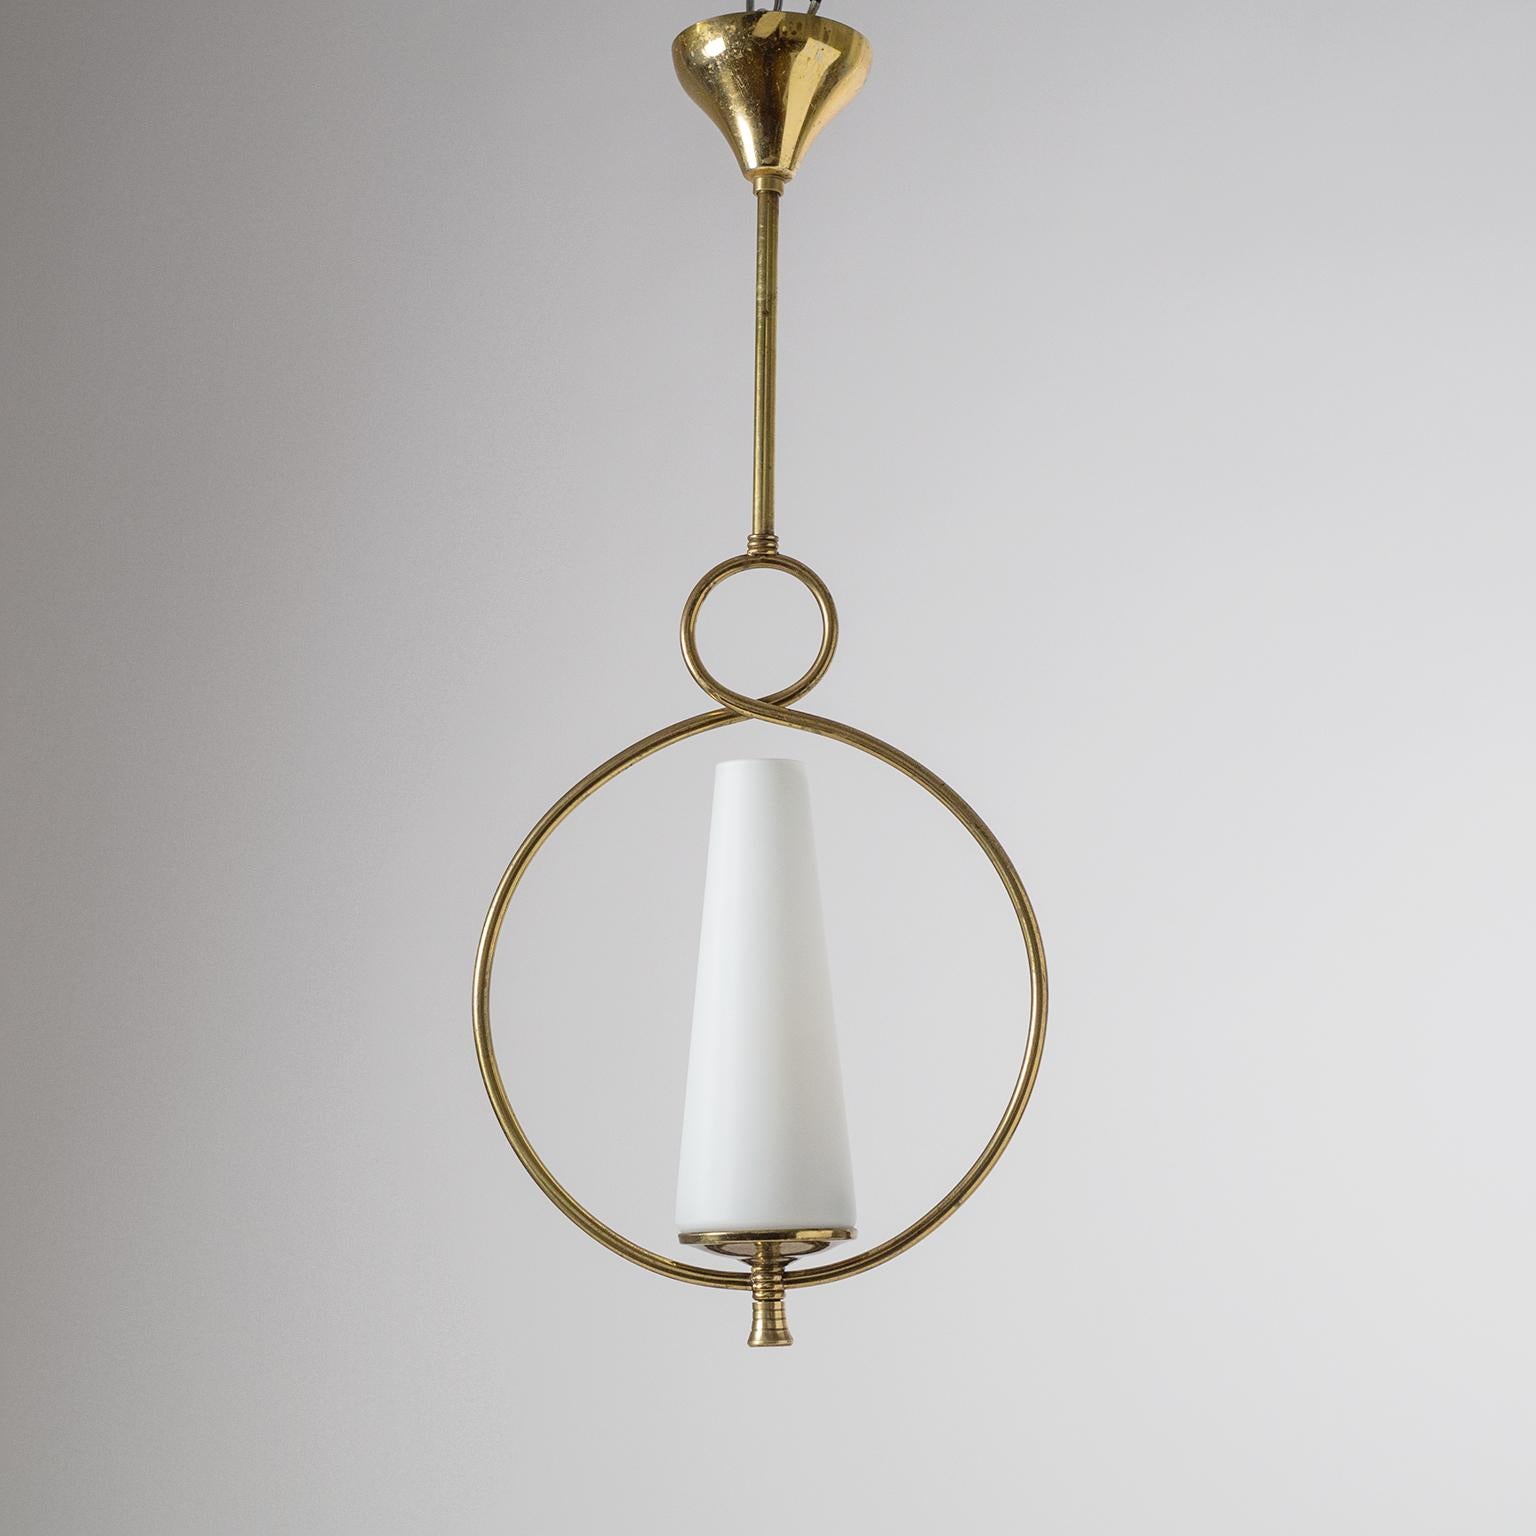 Charming French modernist brass pendant from the 1950s. The conical glass diffuser has a white inner casing and satin finish on the outside. Very nice original condition with slight patina on the brass. One brass and ceramic E14 socket with new